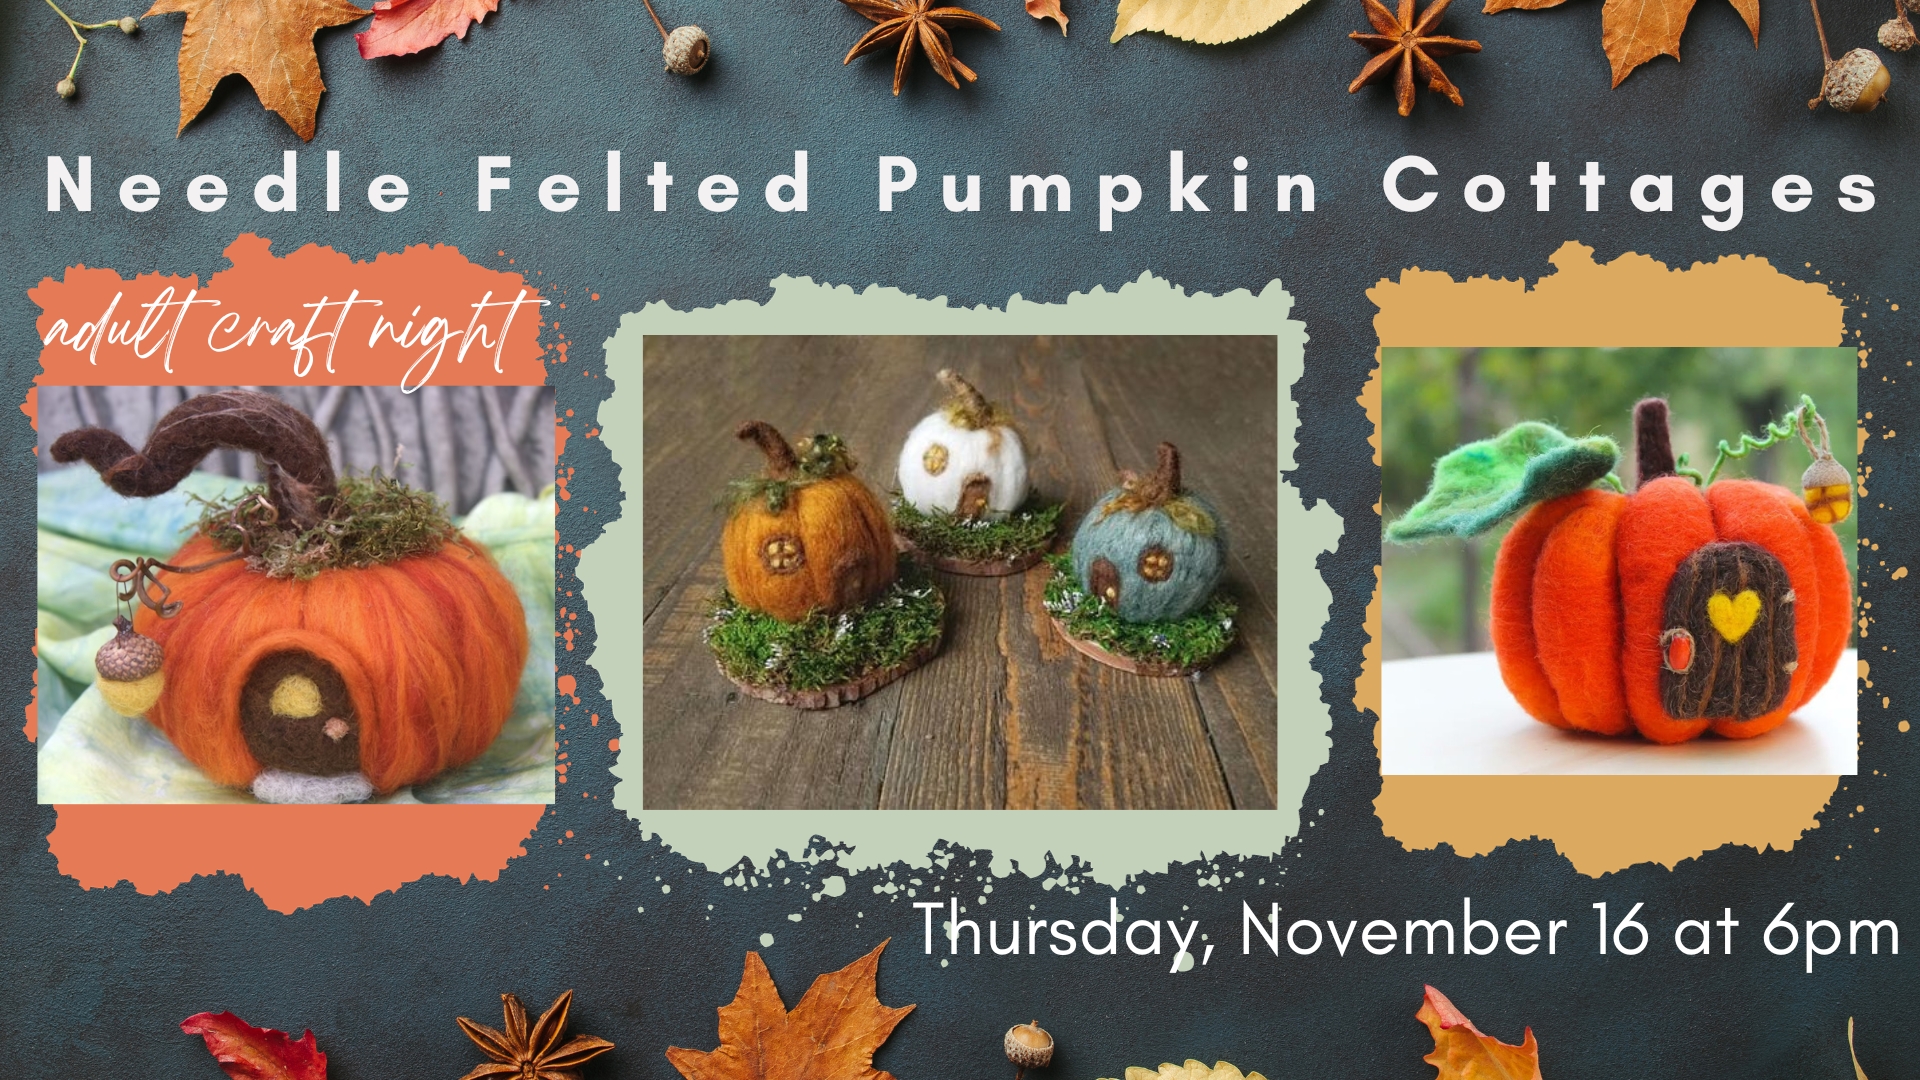 needle felted pumpkins that look like cottages